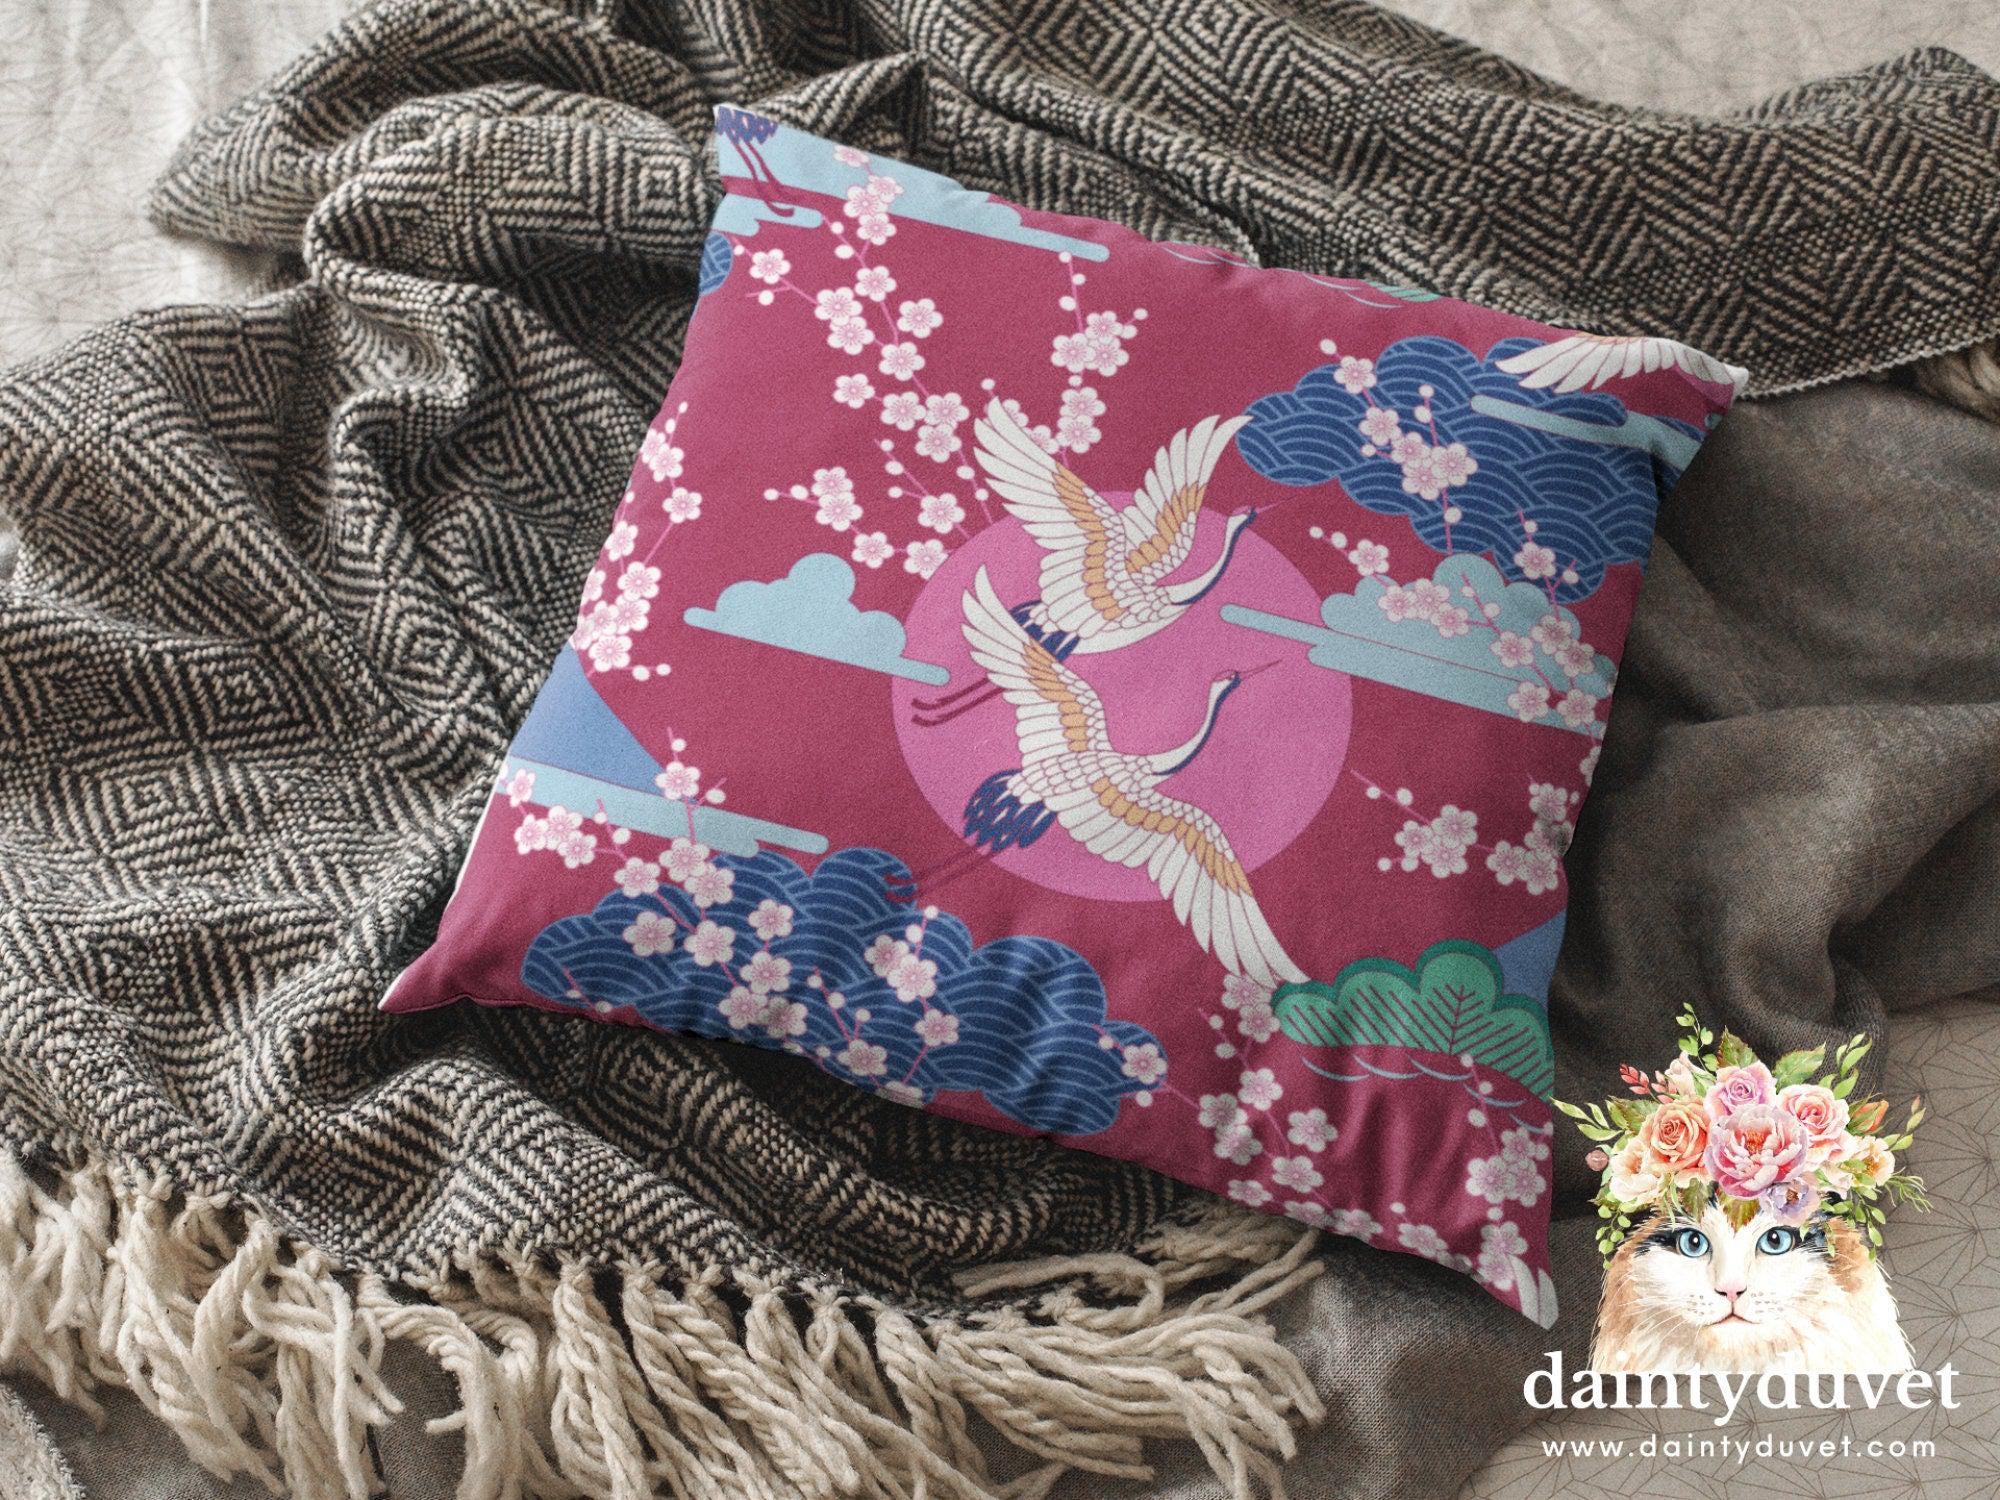 daintyduvet Red Violet Pillowcase with Crane and Cherry Blossoms Prints, Japanese Fabric Chair Cushion Cover, Japanese Decor Square Pillow Cover